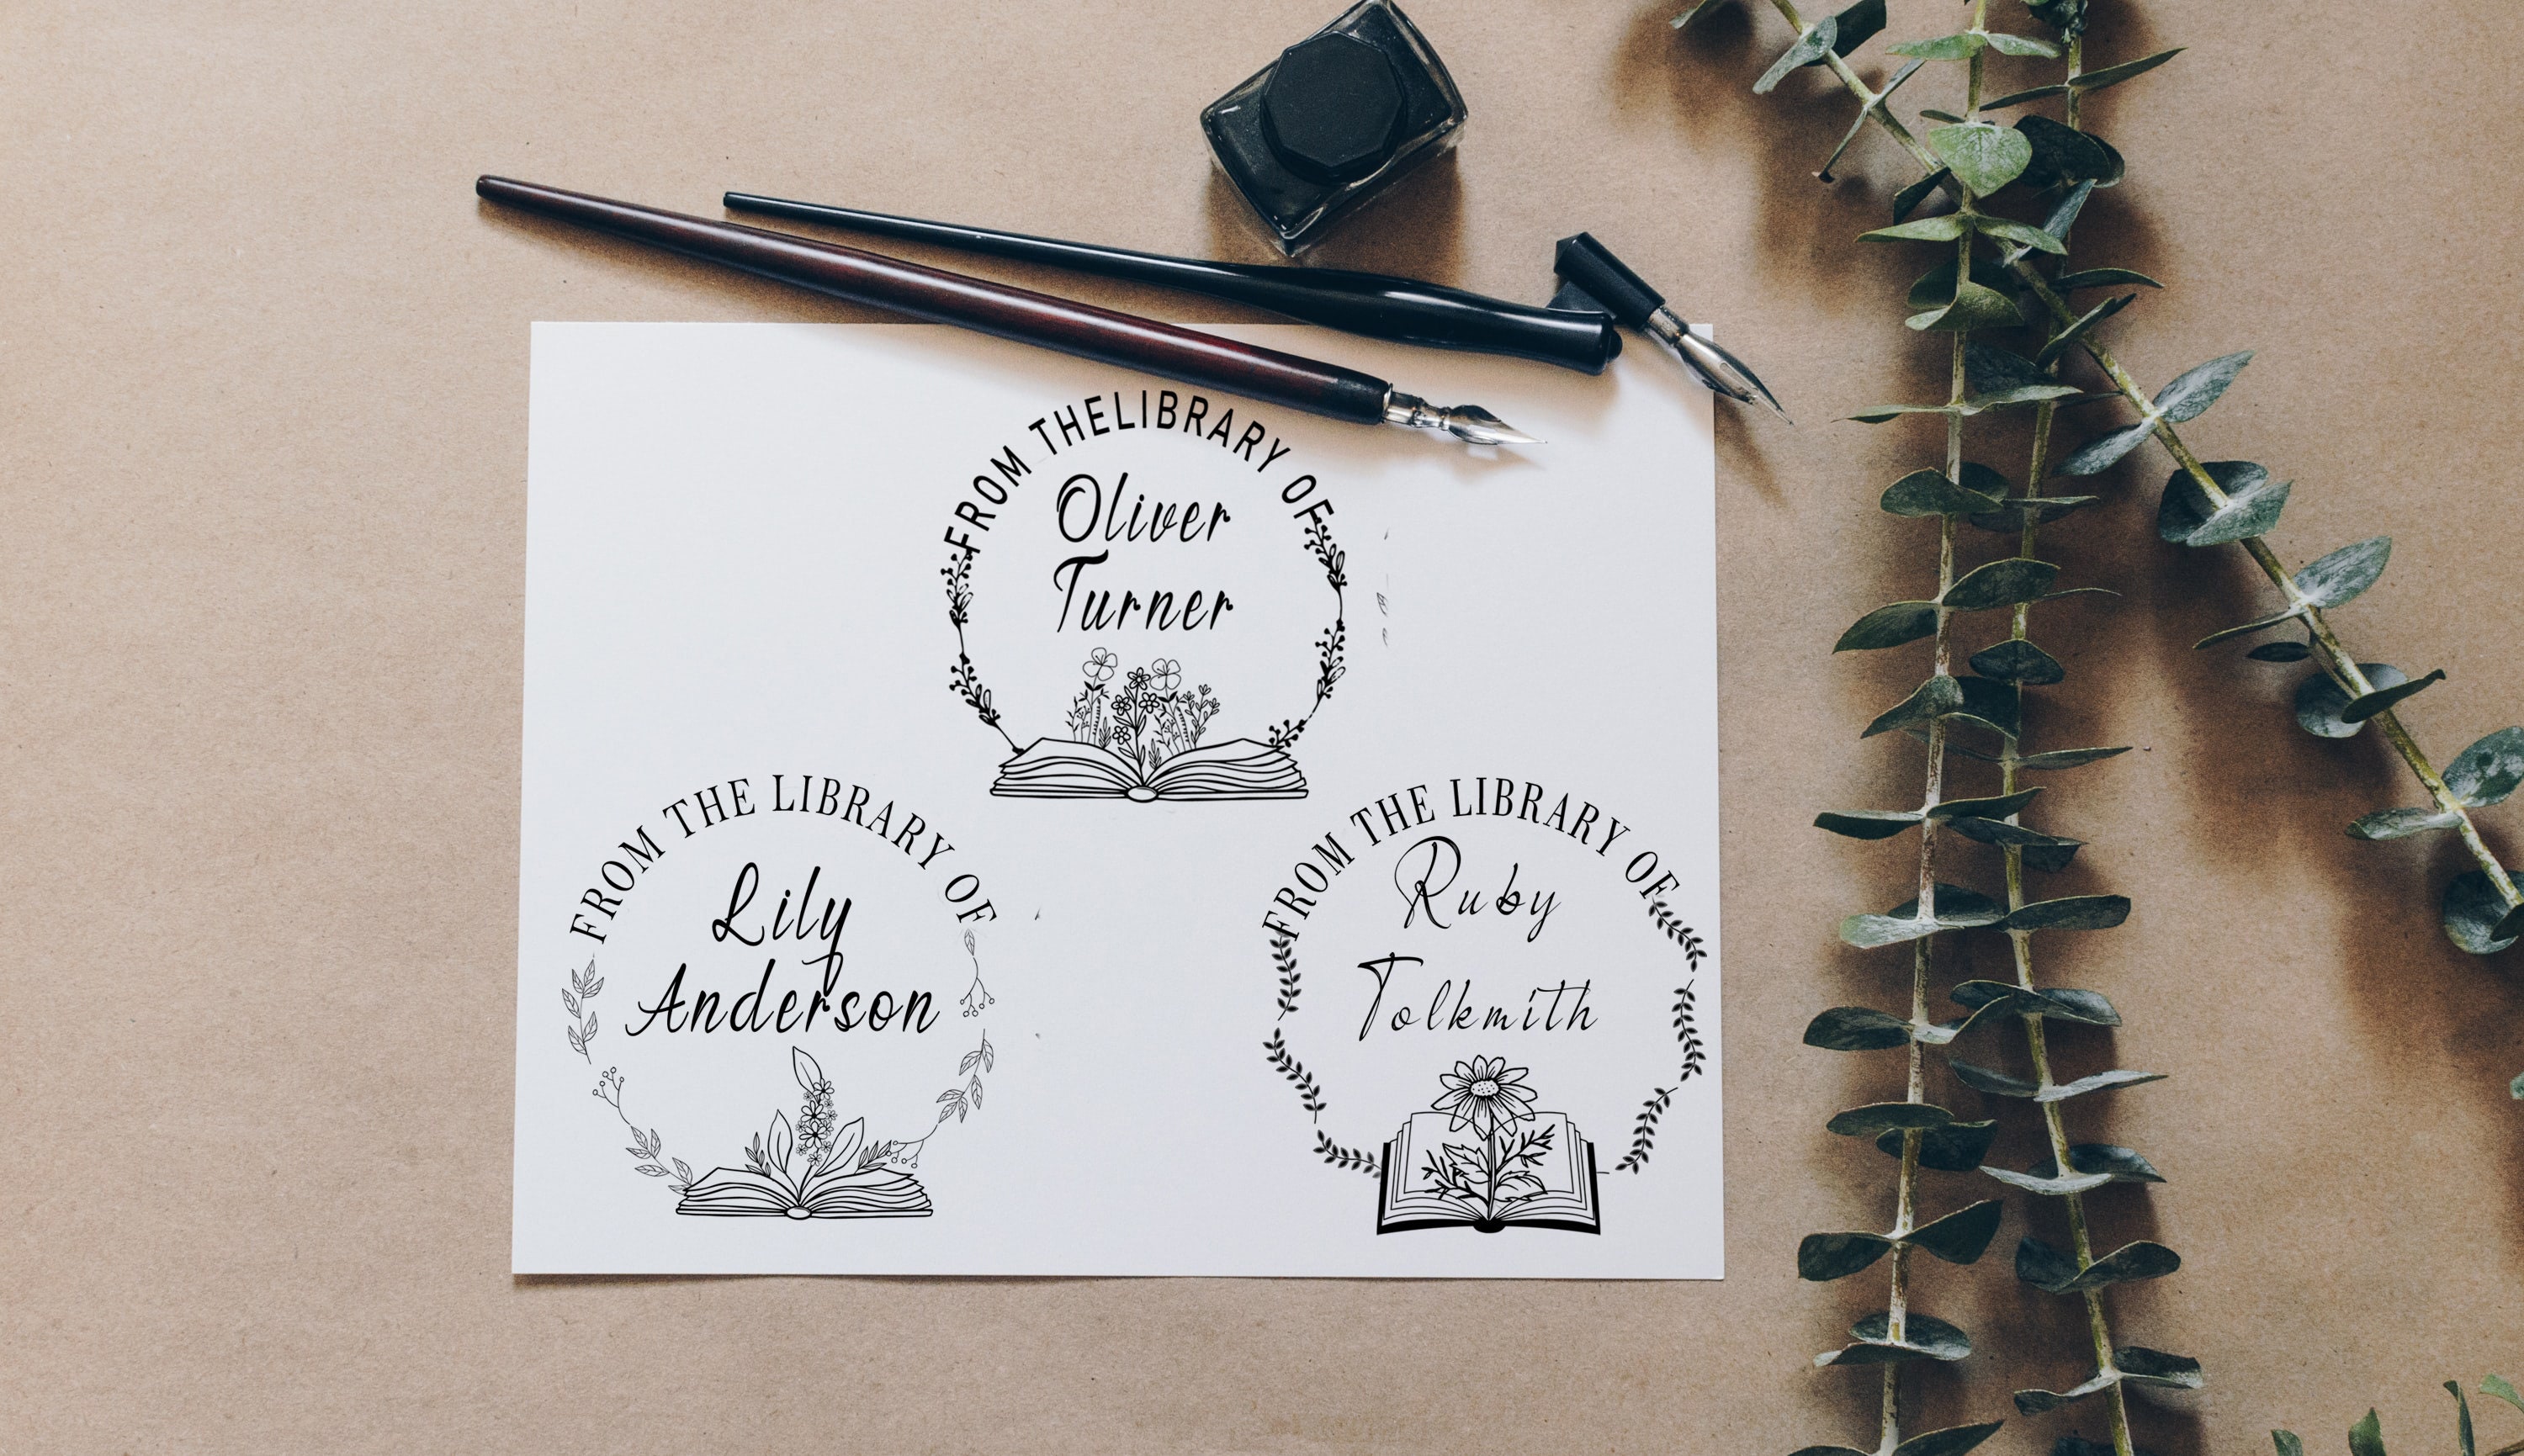 Book Stamp, Custom Stamps, Library Stamp, Ex Libris Stamp, Personalized  Gift, Book Label, Custom Stamps, Self-inking Stamp, Rubber Stamp 